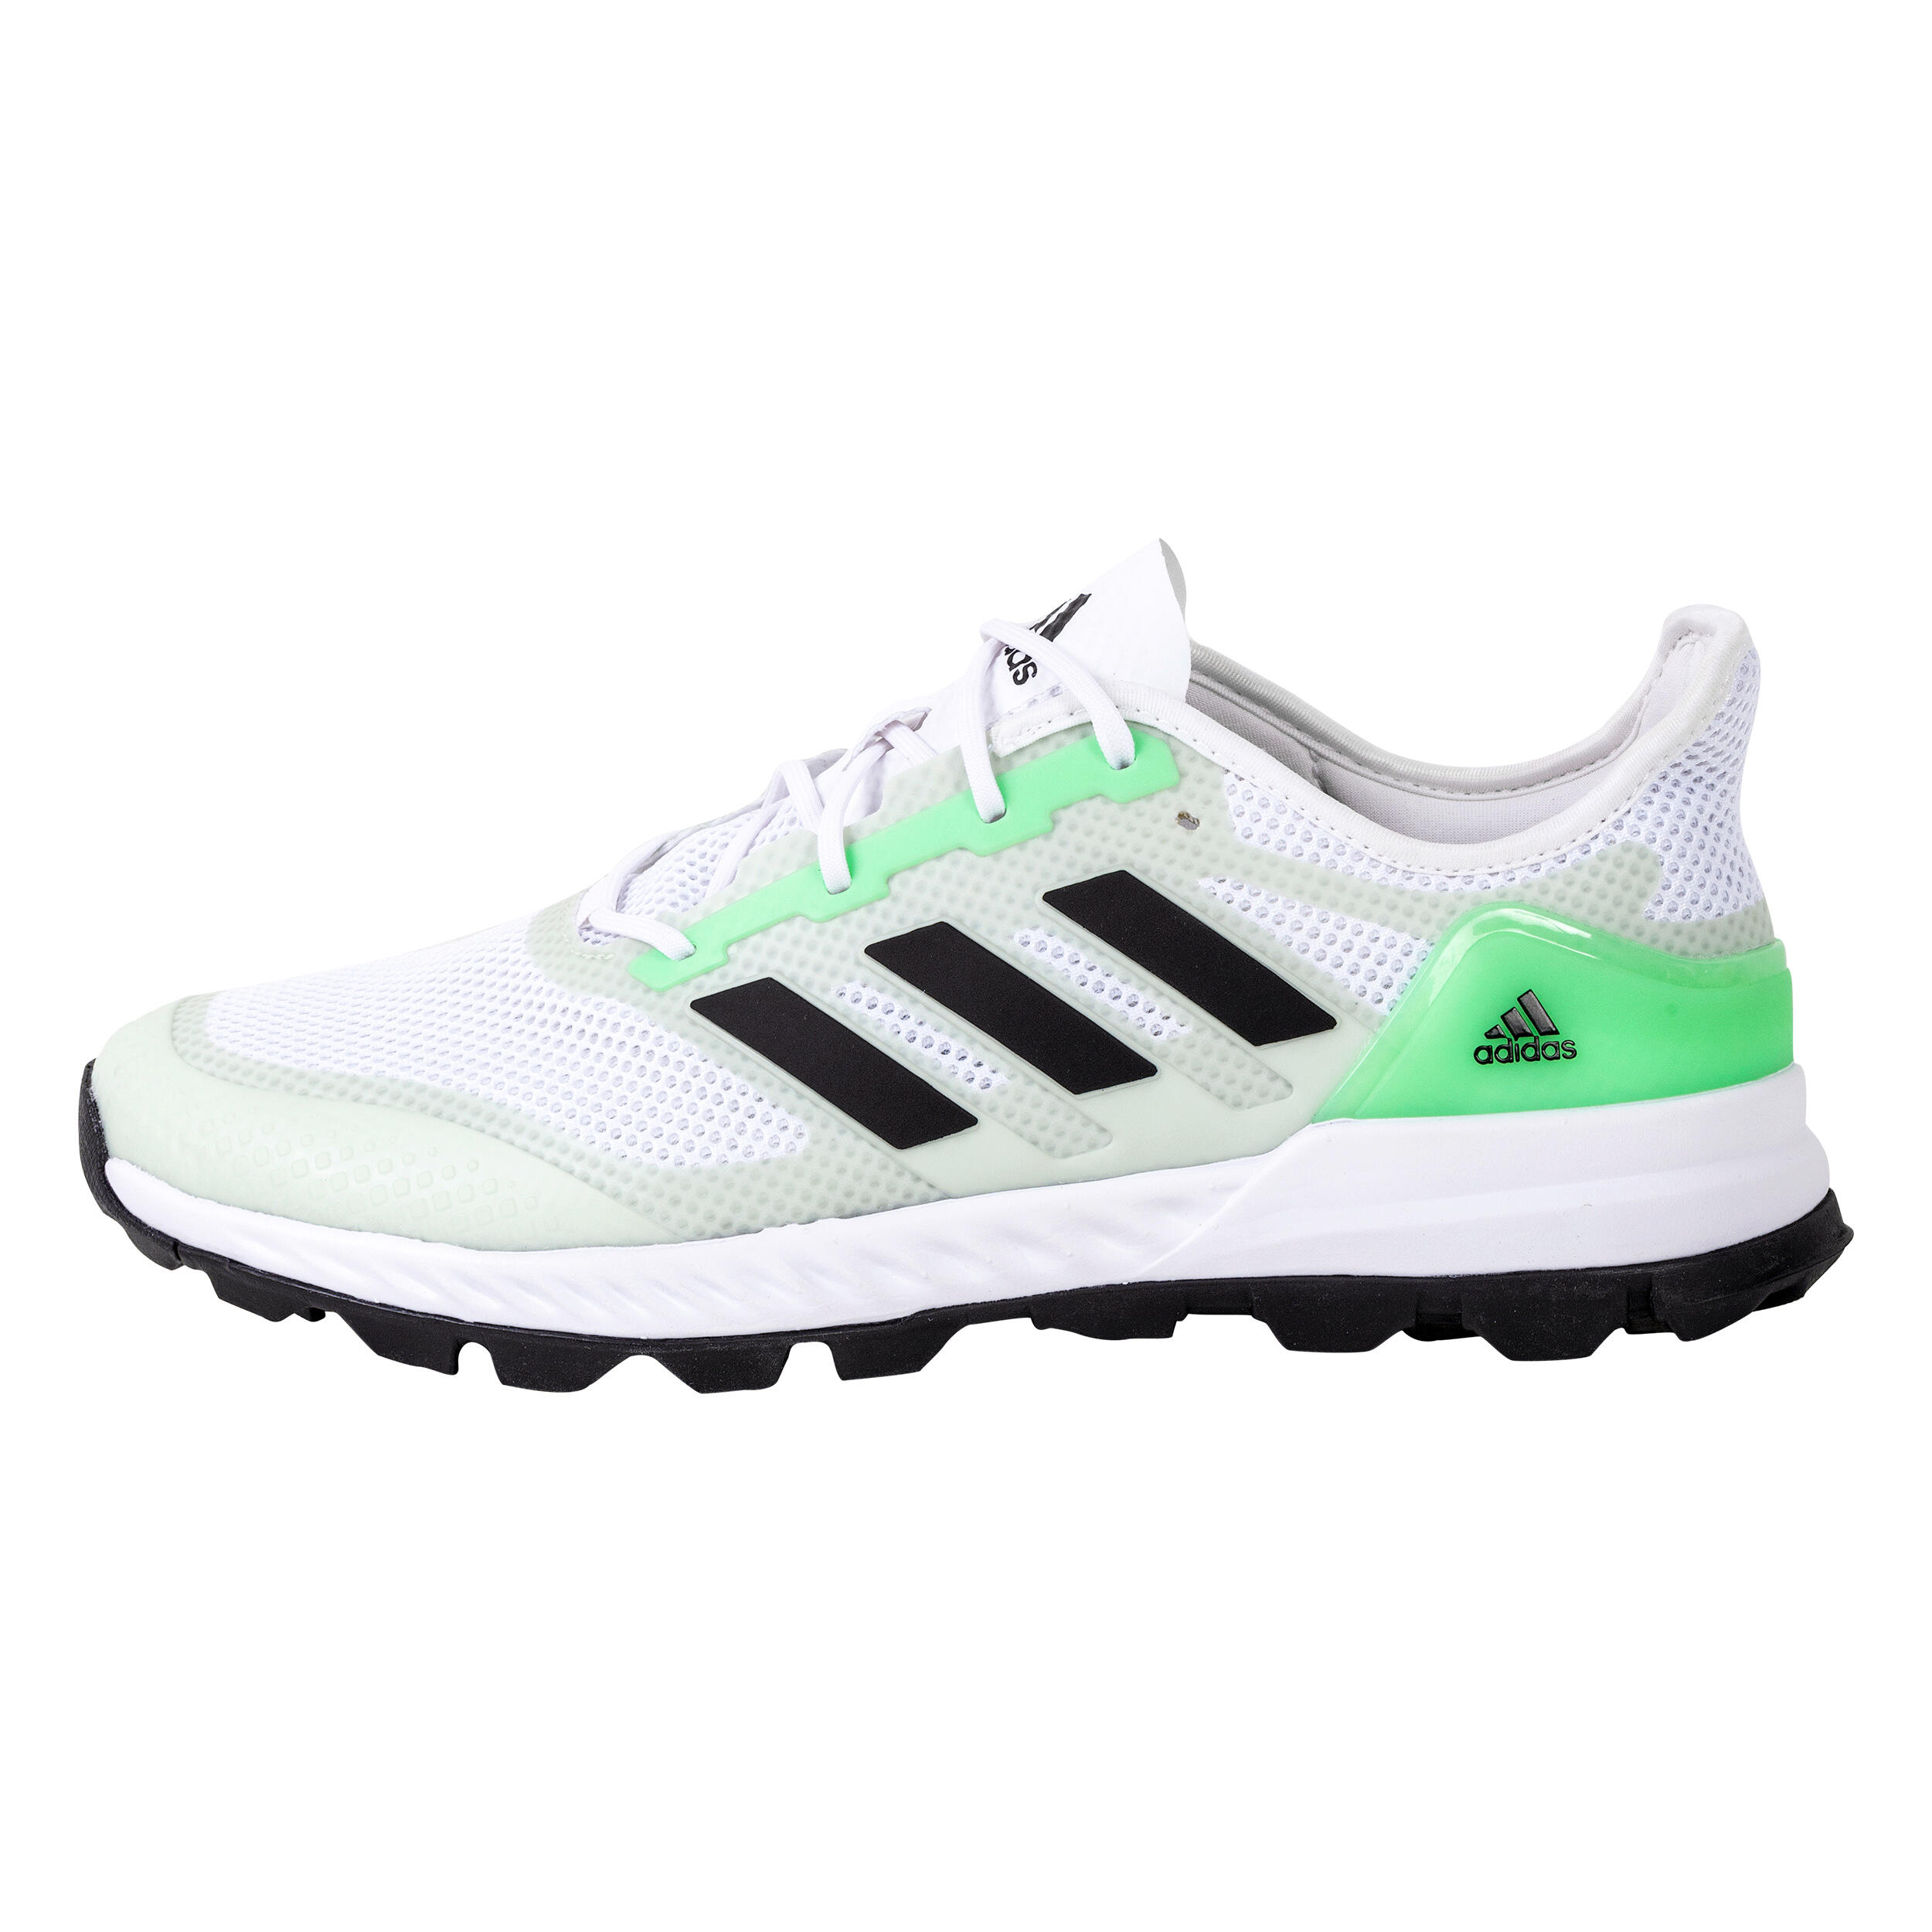 ADIDAS Adult High-Intensity Field Hockey Shoes Adipower - White